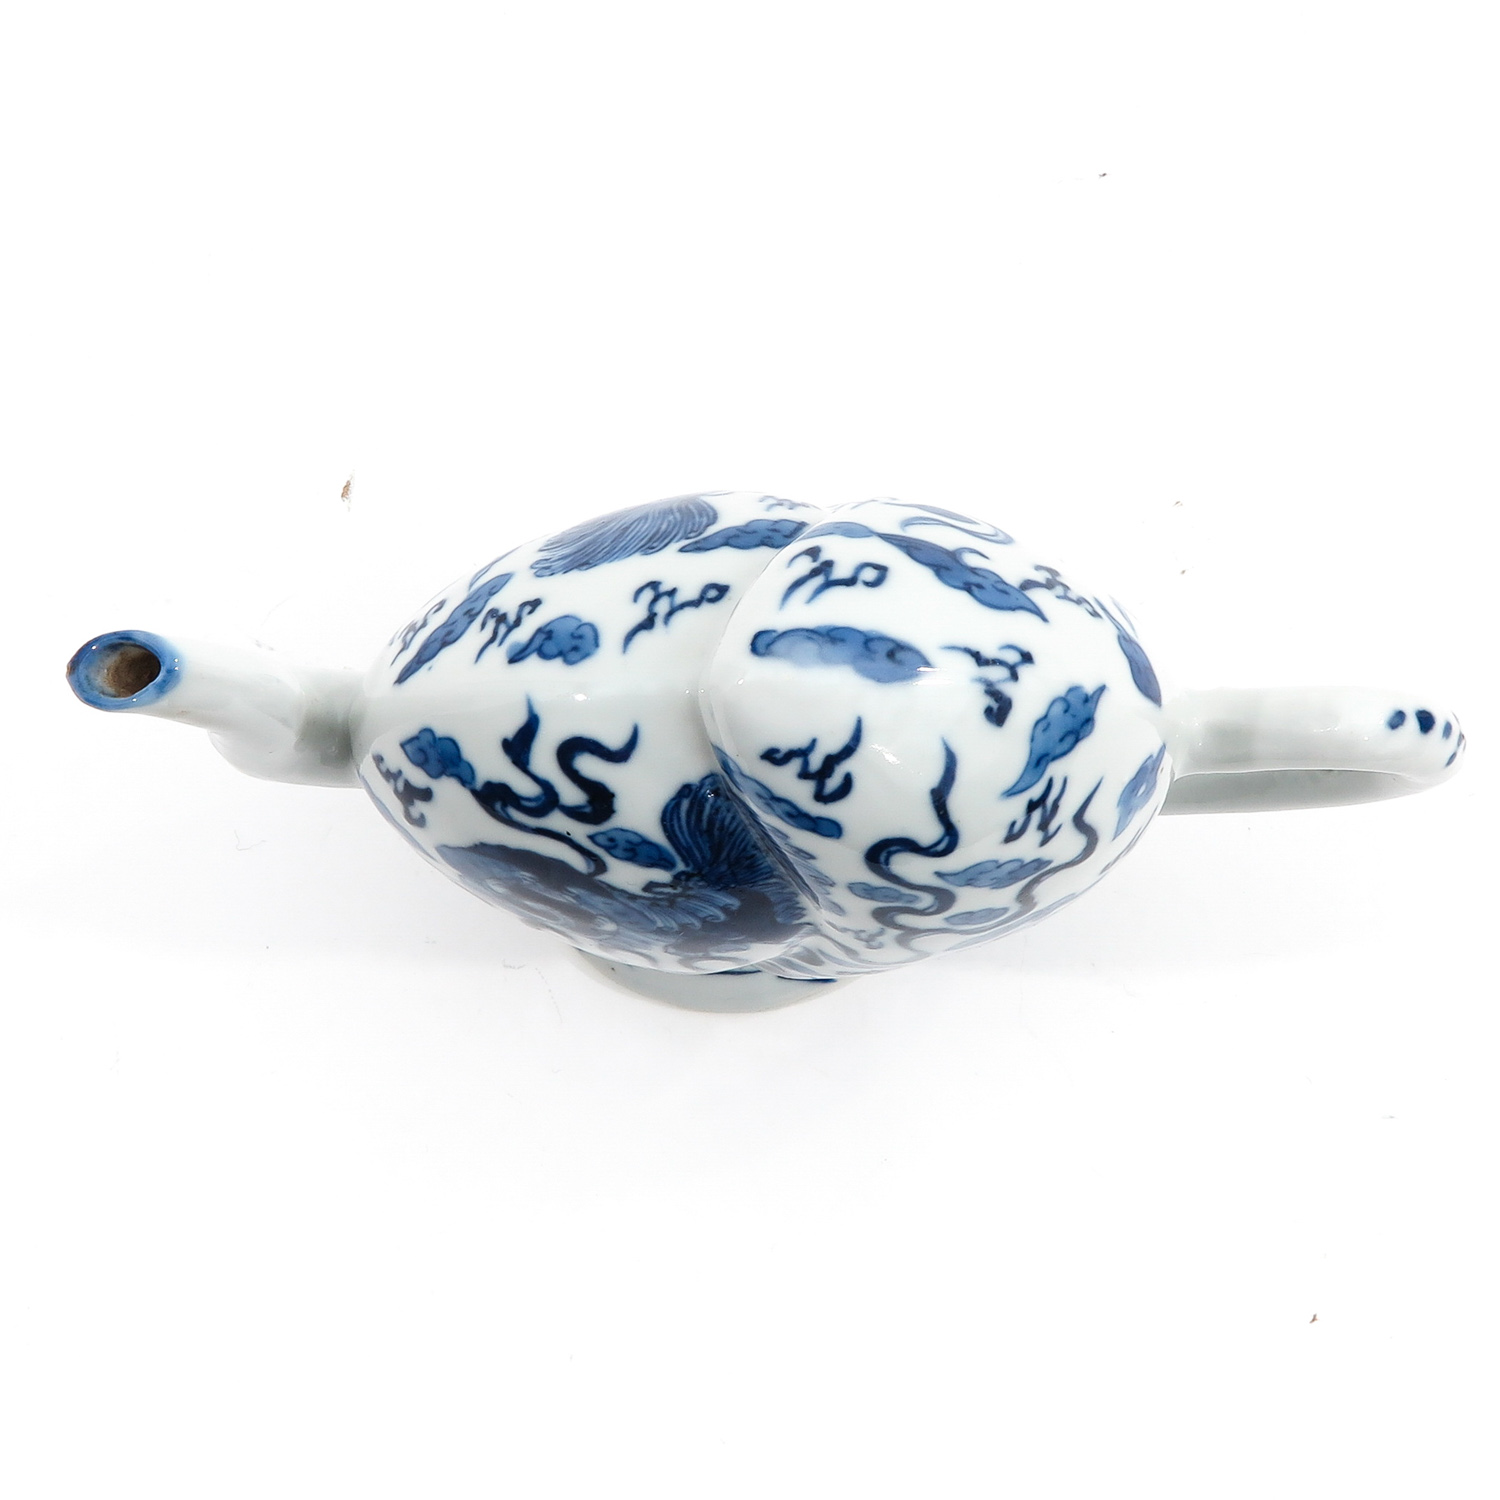 A Blue and White Cadogan Teapot - Image 5 of 9